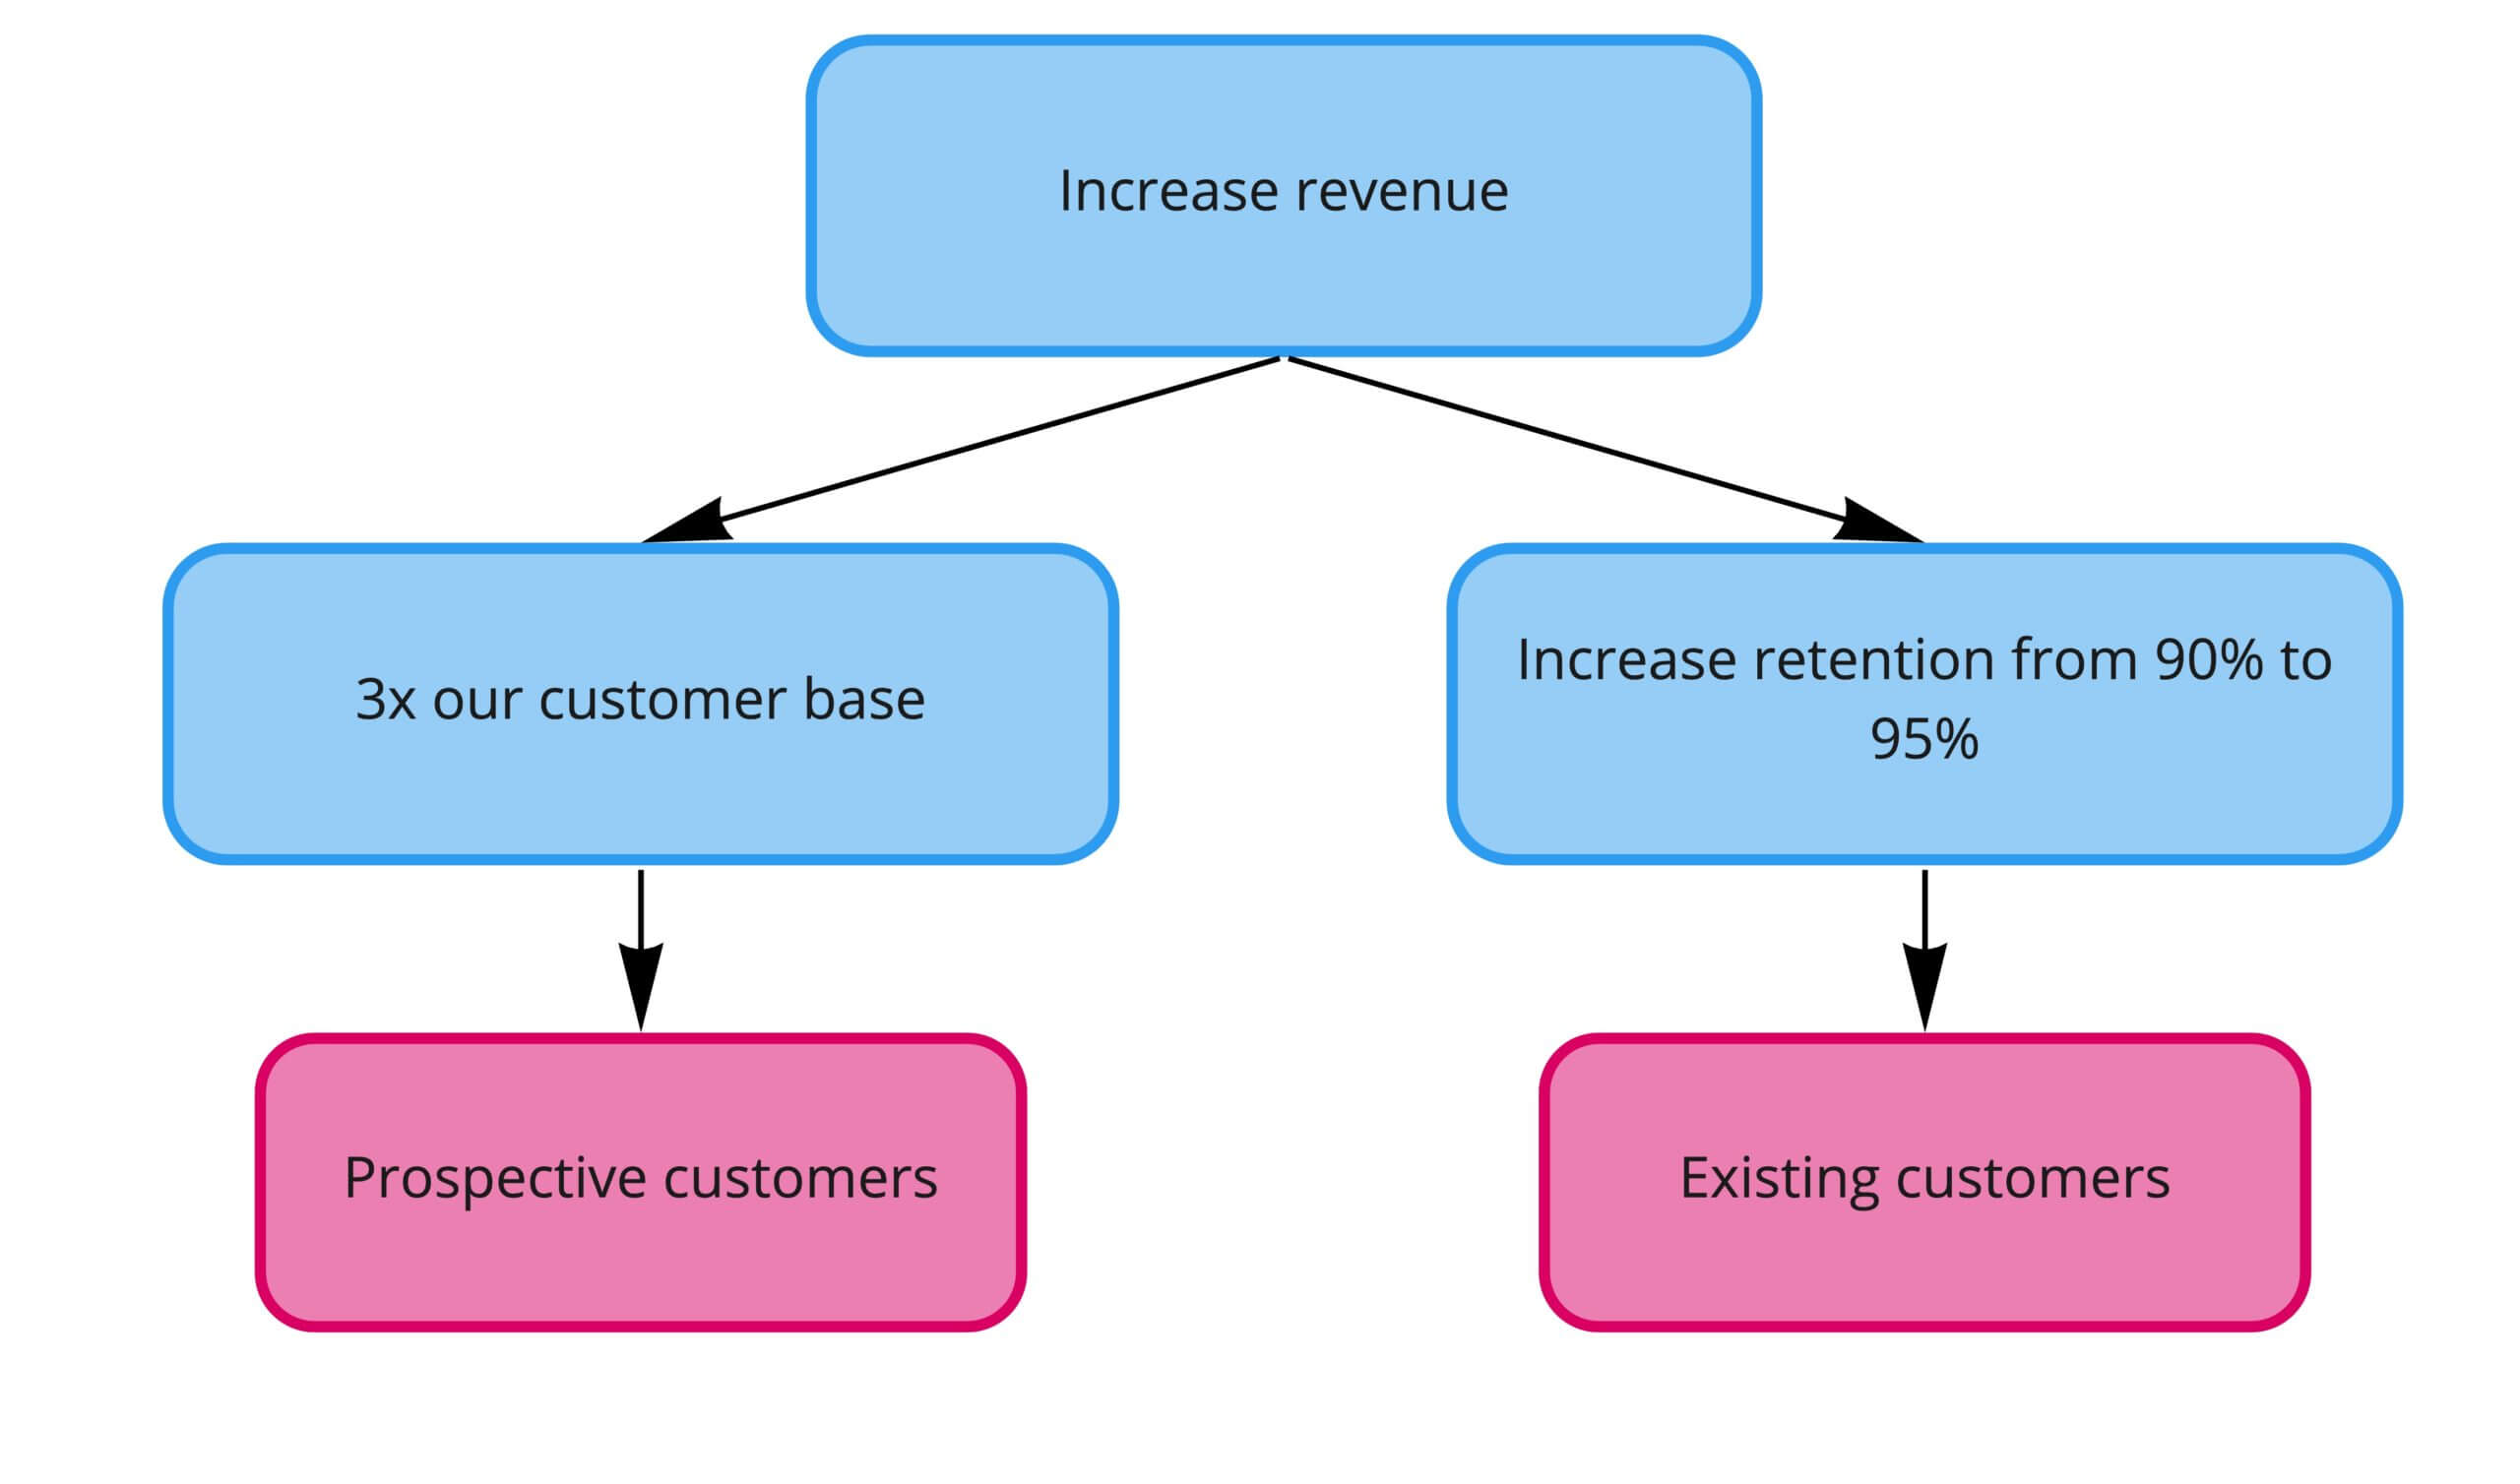 A simple opportunity solution tree. The outcome at the top reads "Increase revenue." This branches into two more specific outcomes "3x our customer base" and "Increase retention from 90% to 95%." These, in turn, branch into two customer segments: prospective customers and existing customers.